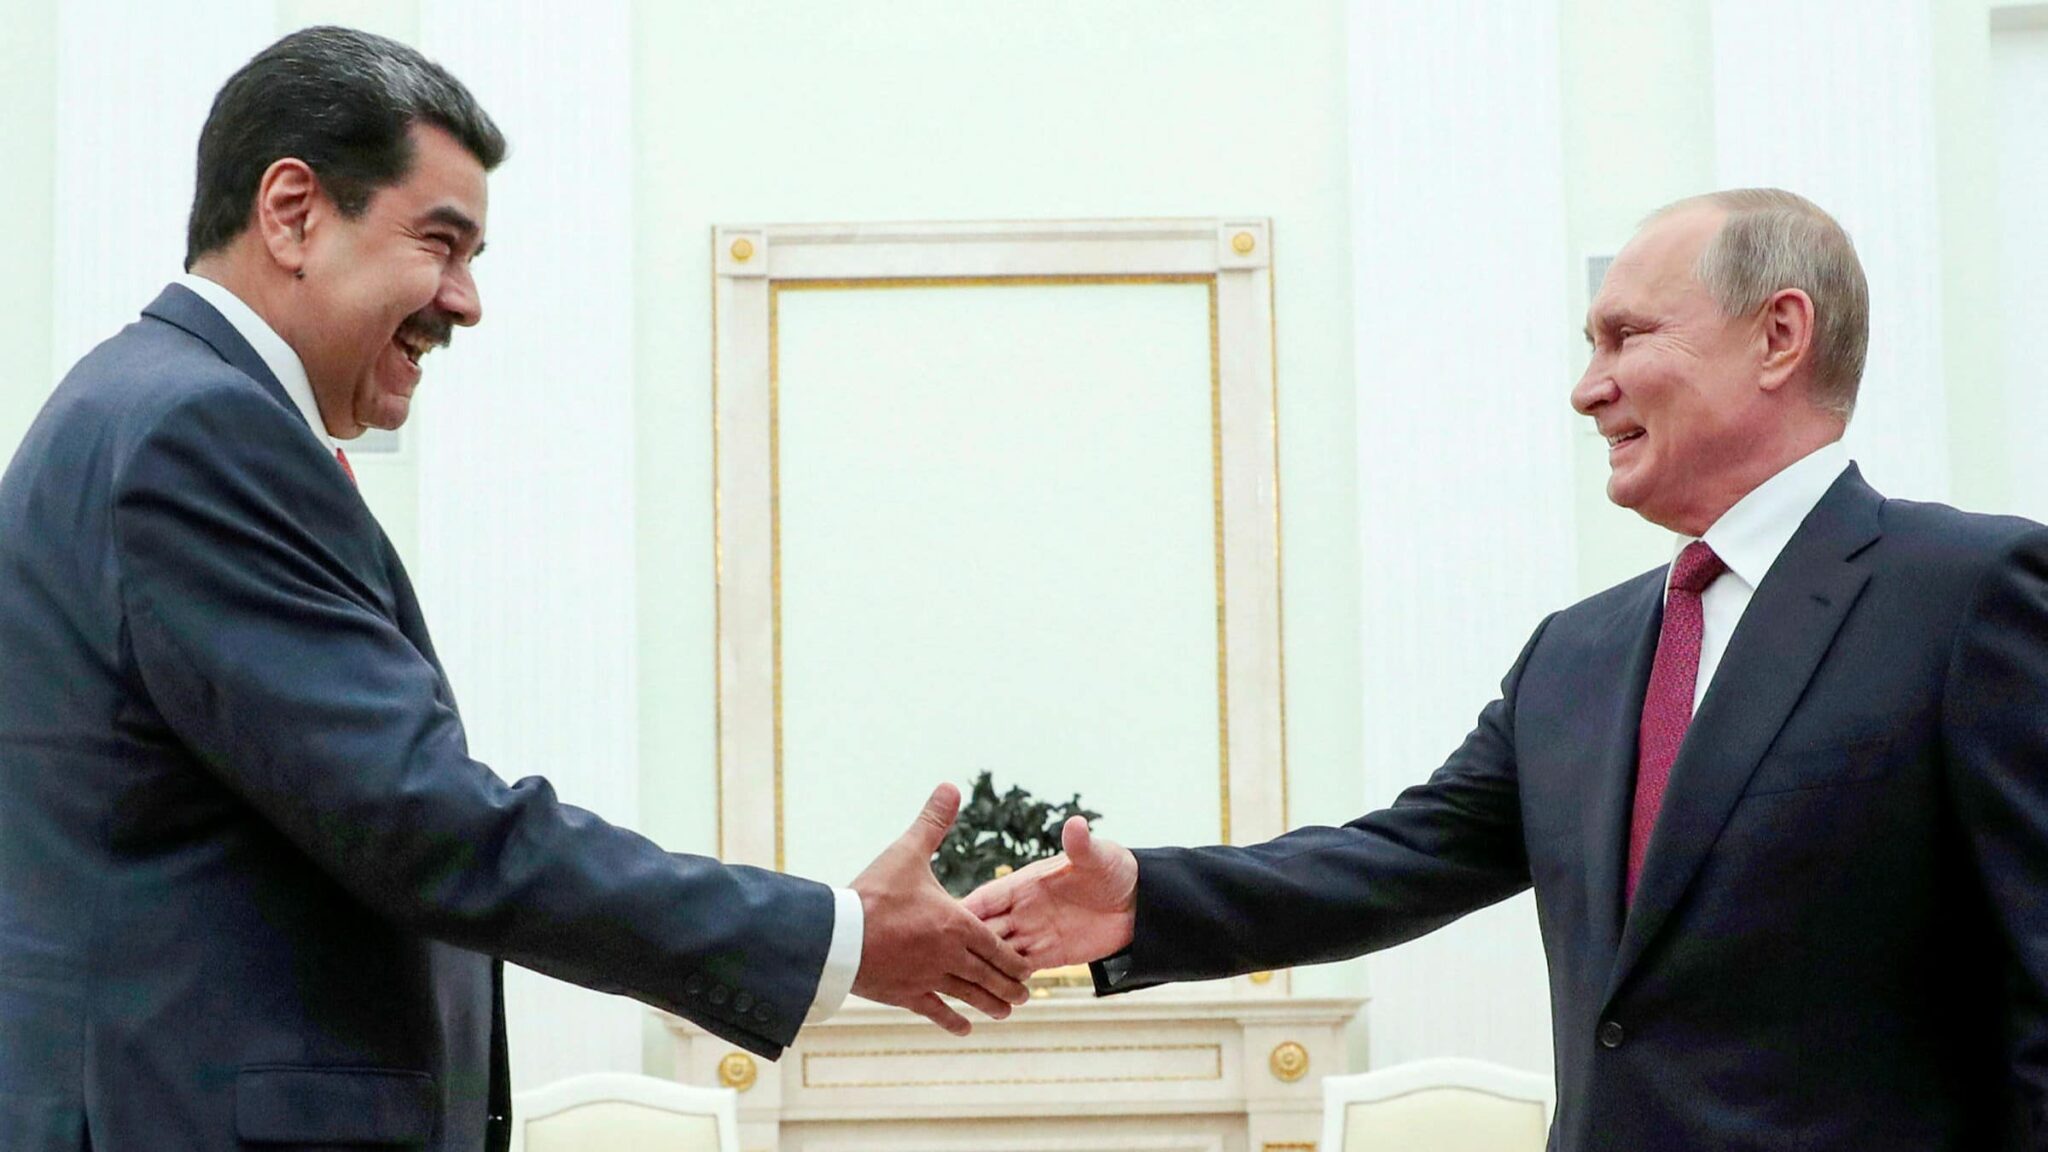 Featured image: Venezuelan president Nicolas Maduro and his Russian counterpart Vladimir Putin have build a strong relationship. File photo.